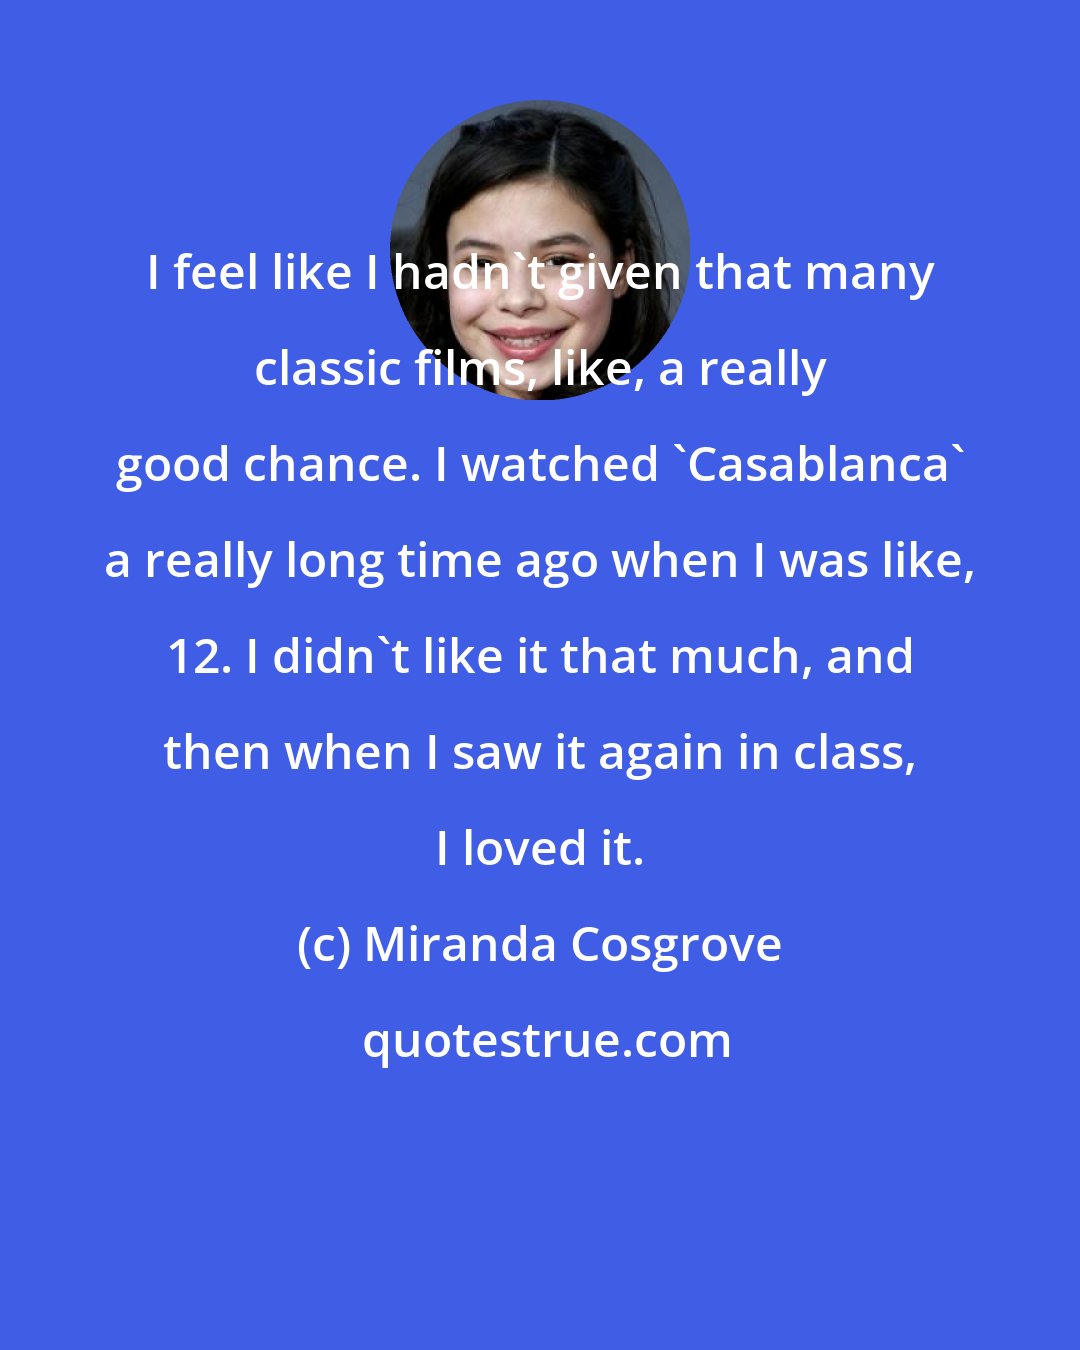 Miranda Cosgrove: I feel like I hadn't given that many classic films, like, a really good chance. I watched 'Casablanca' a really long time ago when I was like, 12. I didn't like it that much, and then when I saw it again in class, I loved it.